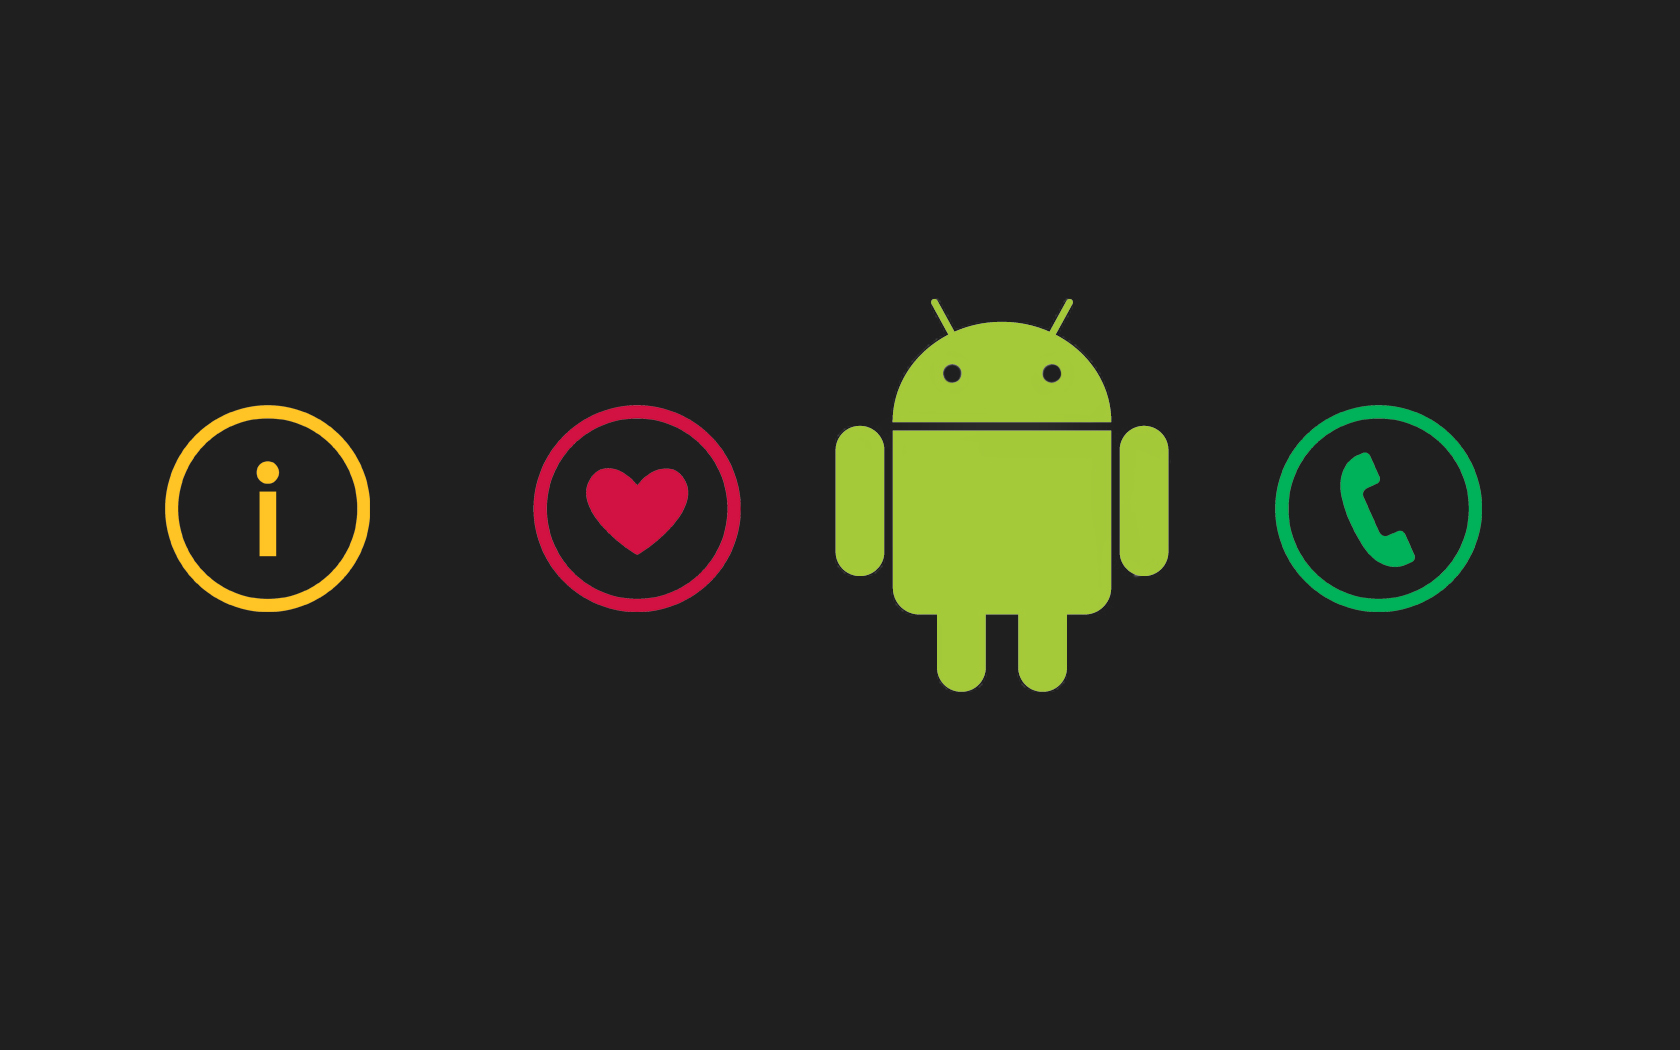 New android 5. 0 rumors continue to circulate